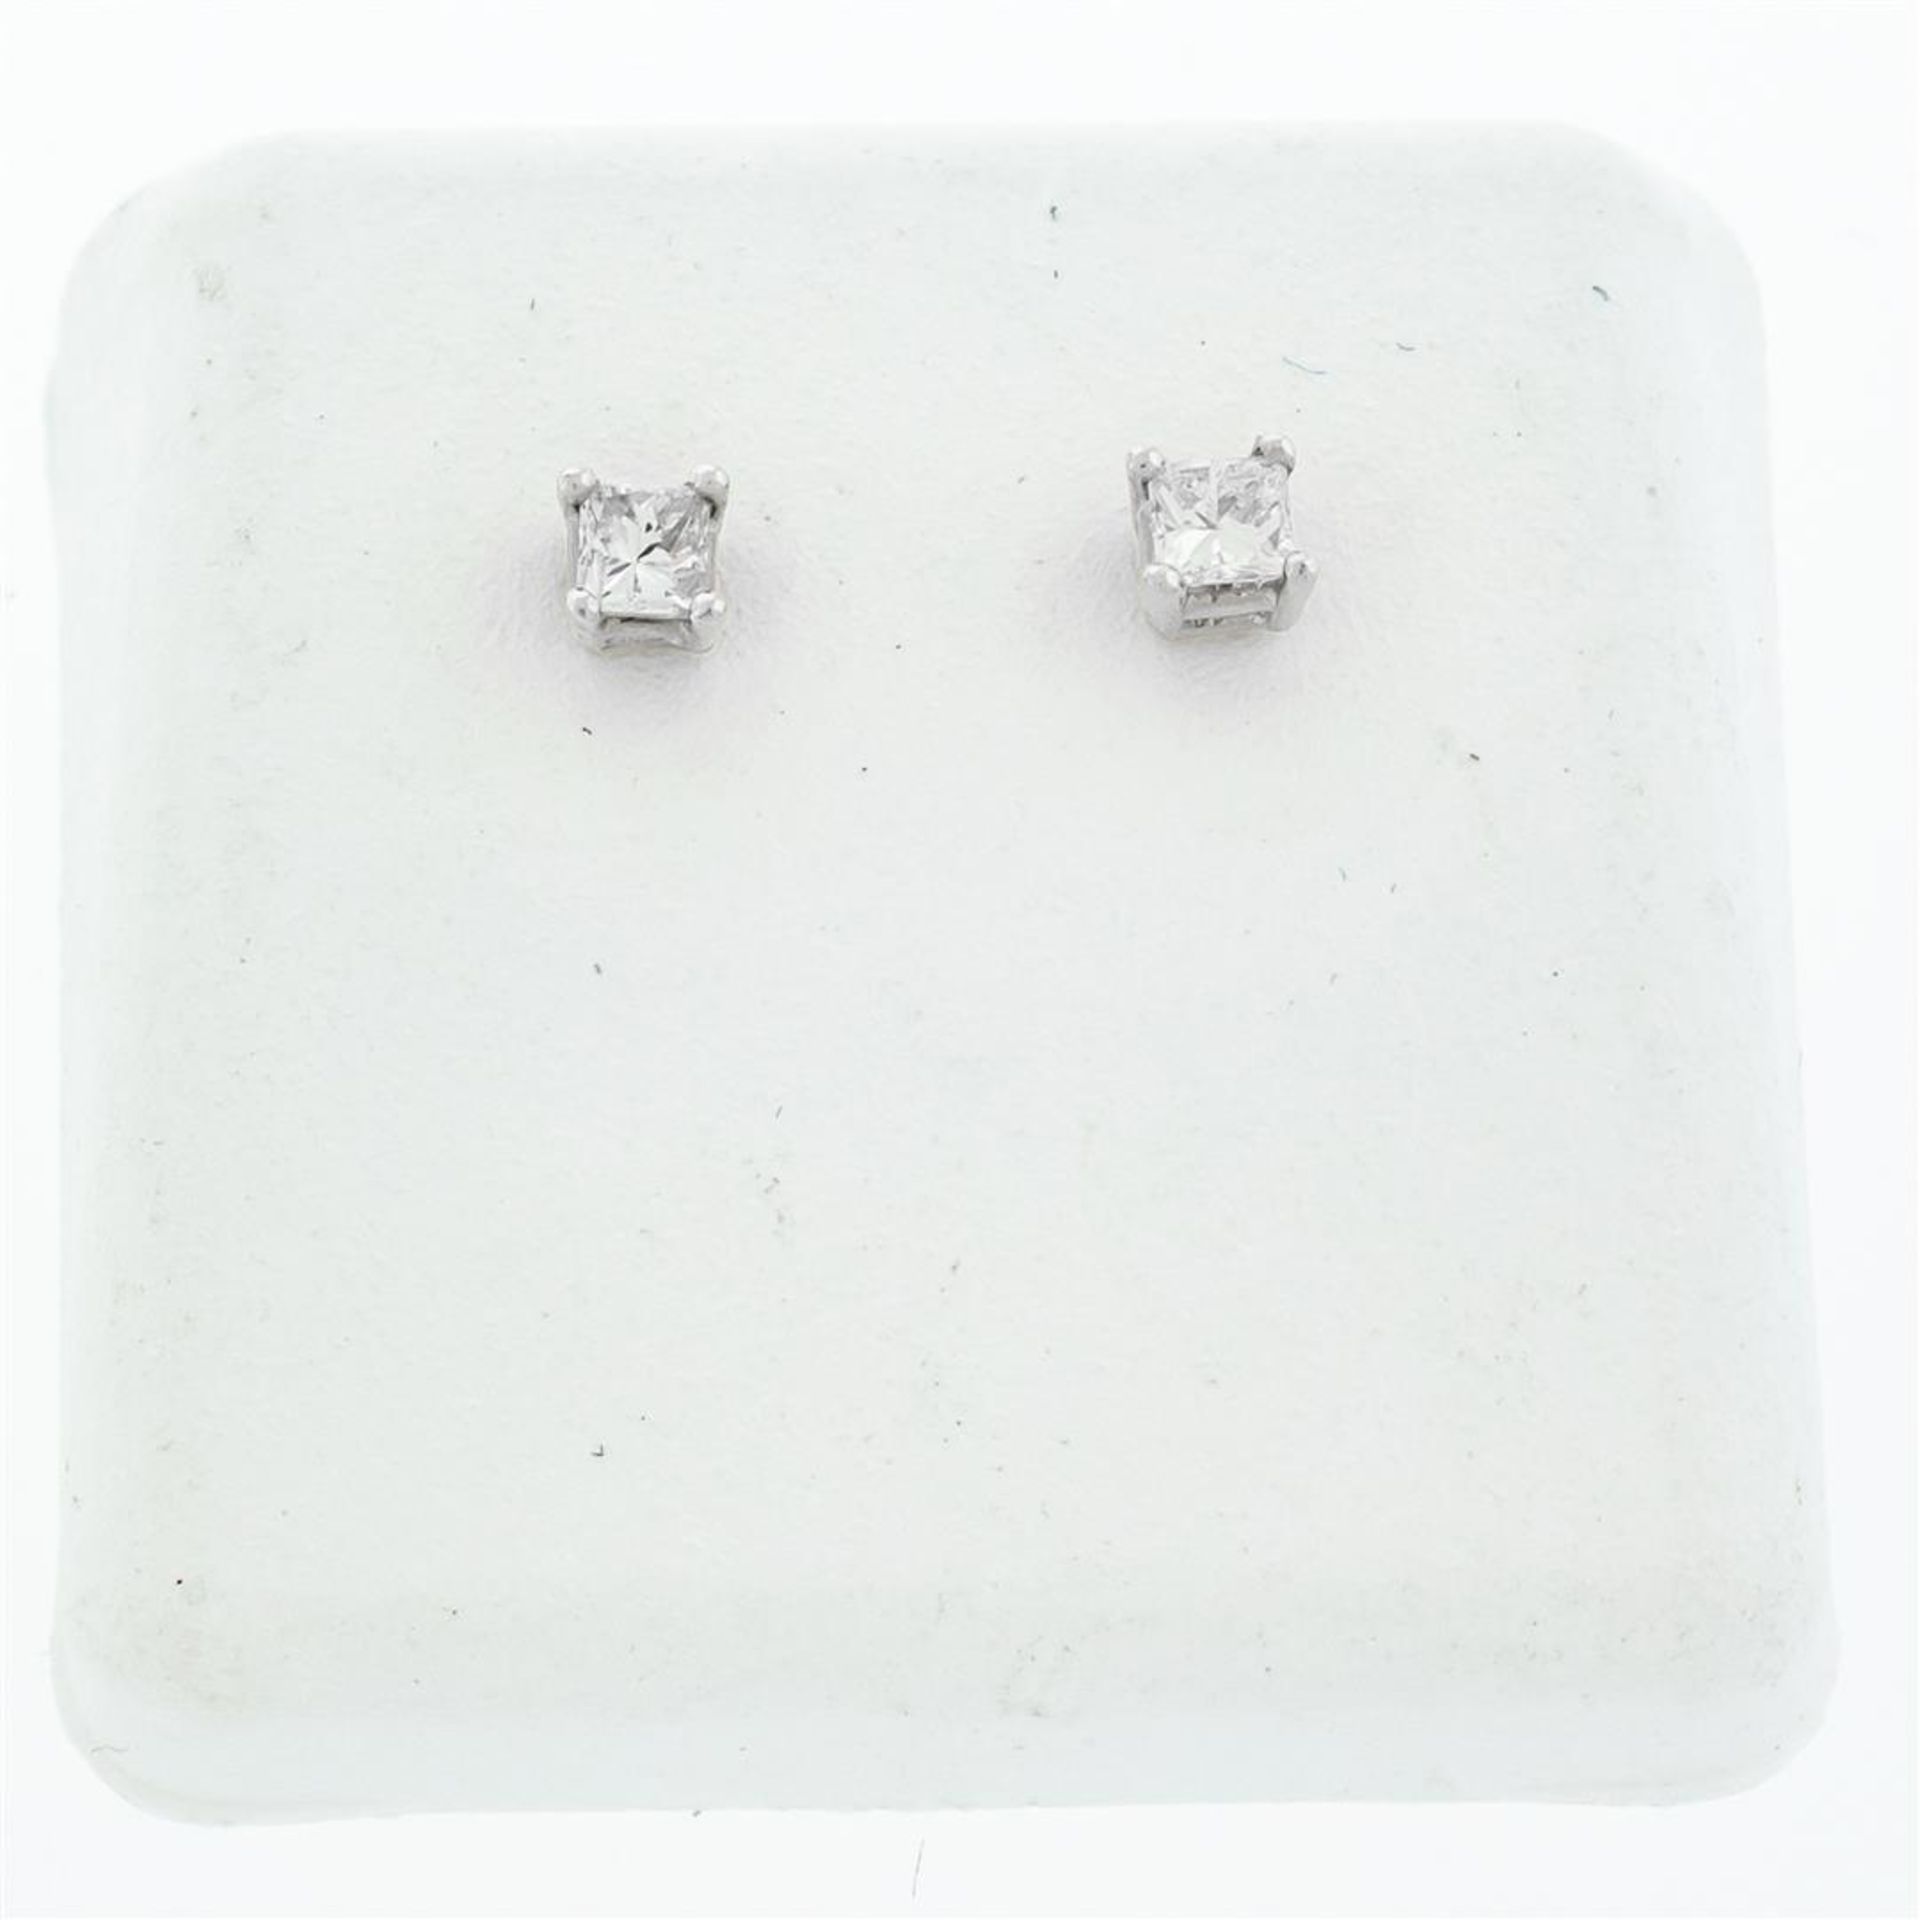 New 14K White Gold Princess Cut Solitaire Stud Earrings - Image 2 of 6